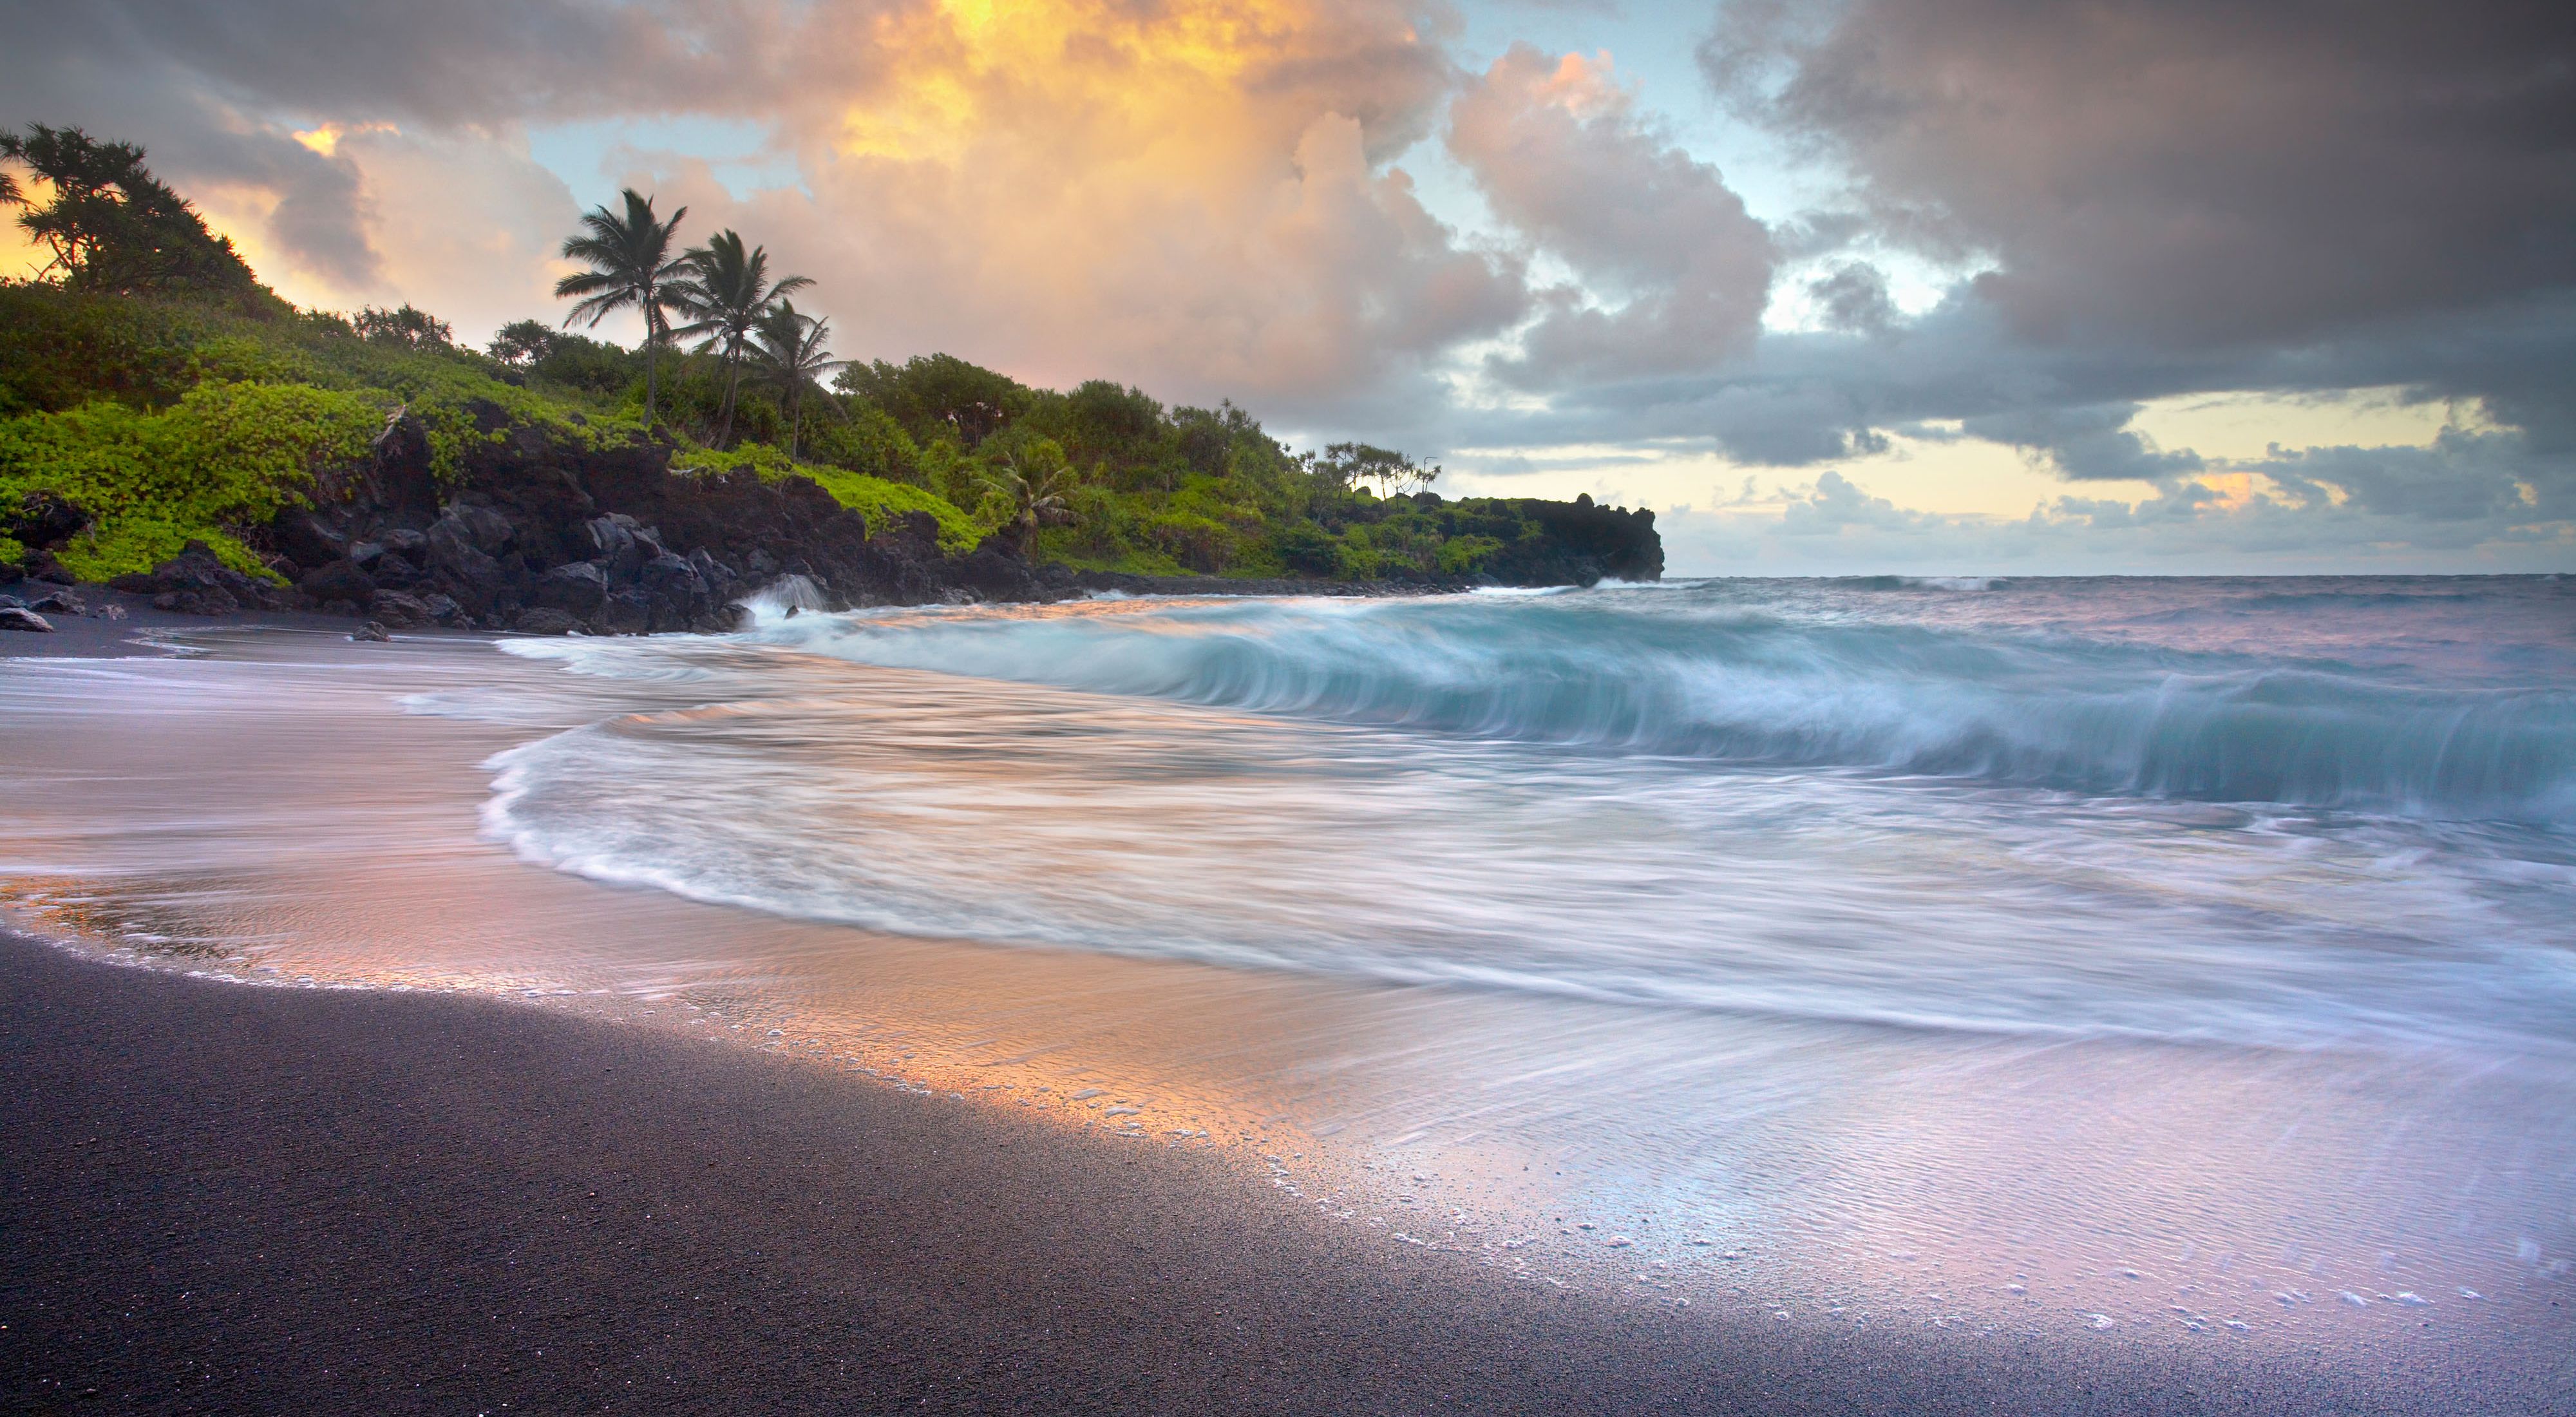 Waves crash on the black sand beach of Waianapanapa Sands with a rocky outcrop topped with lush greenery in the distance.